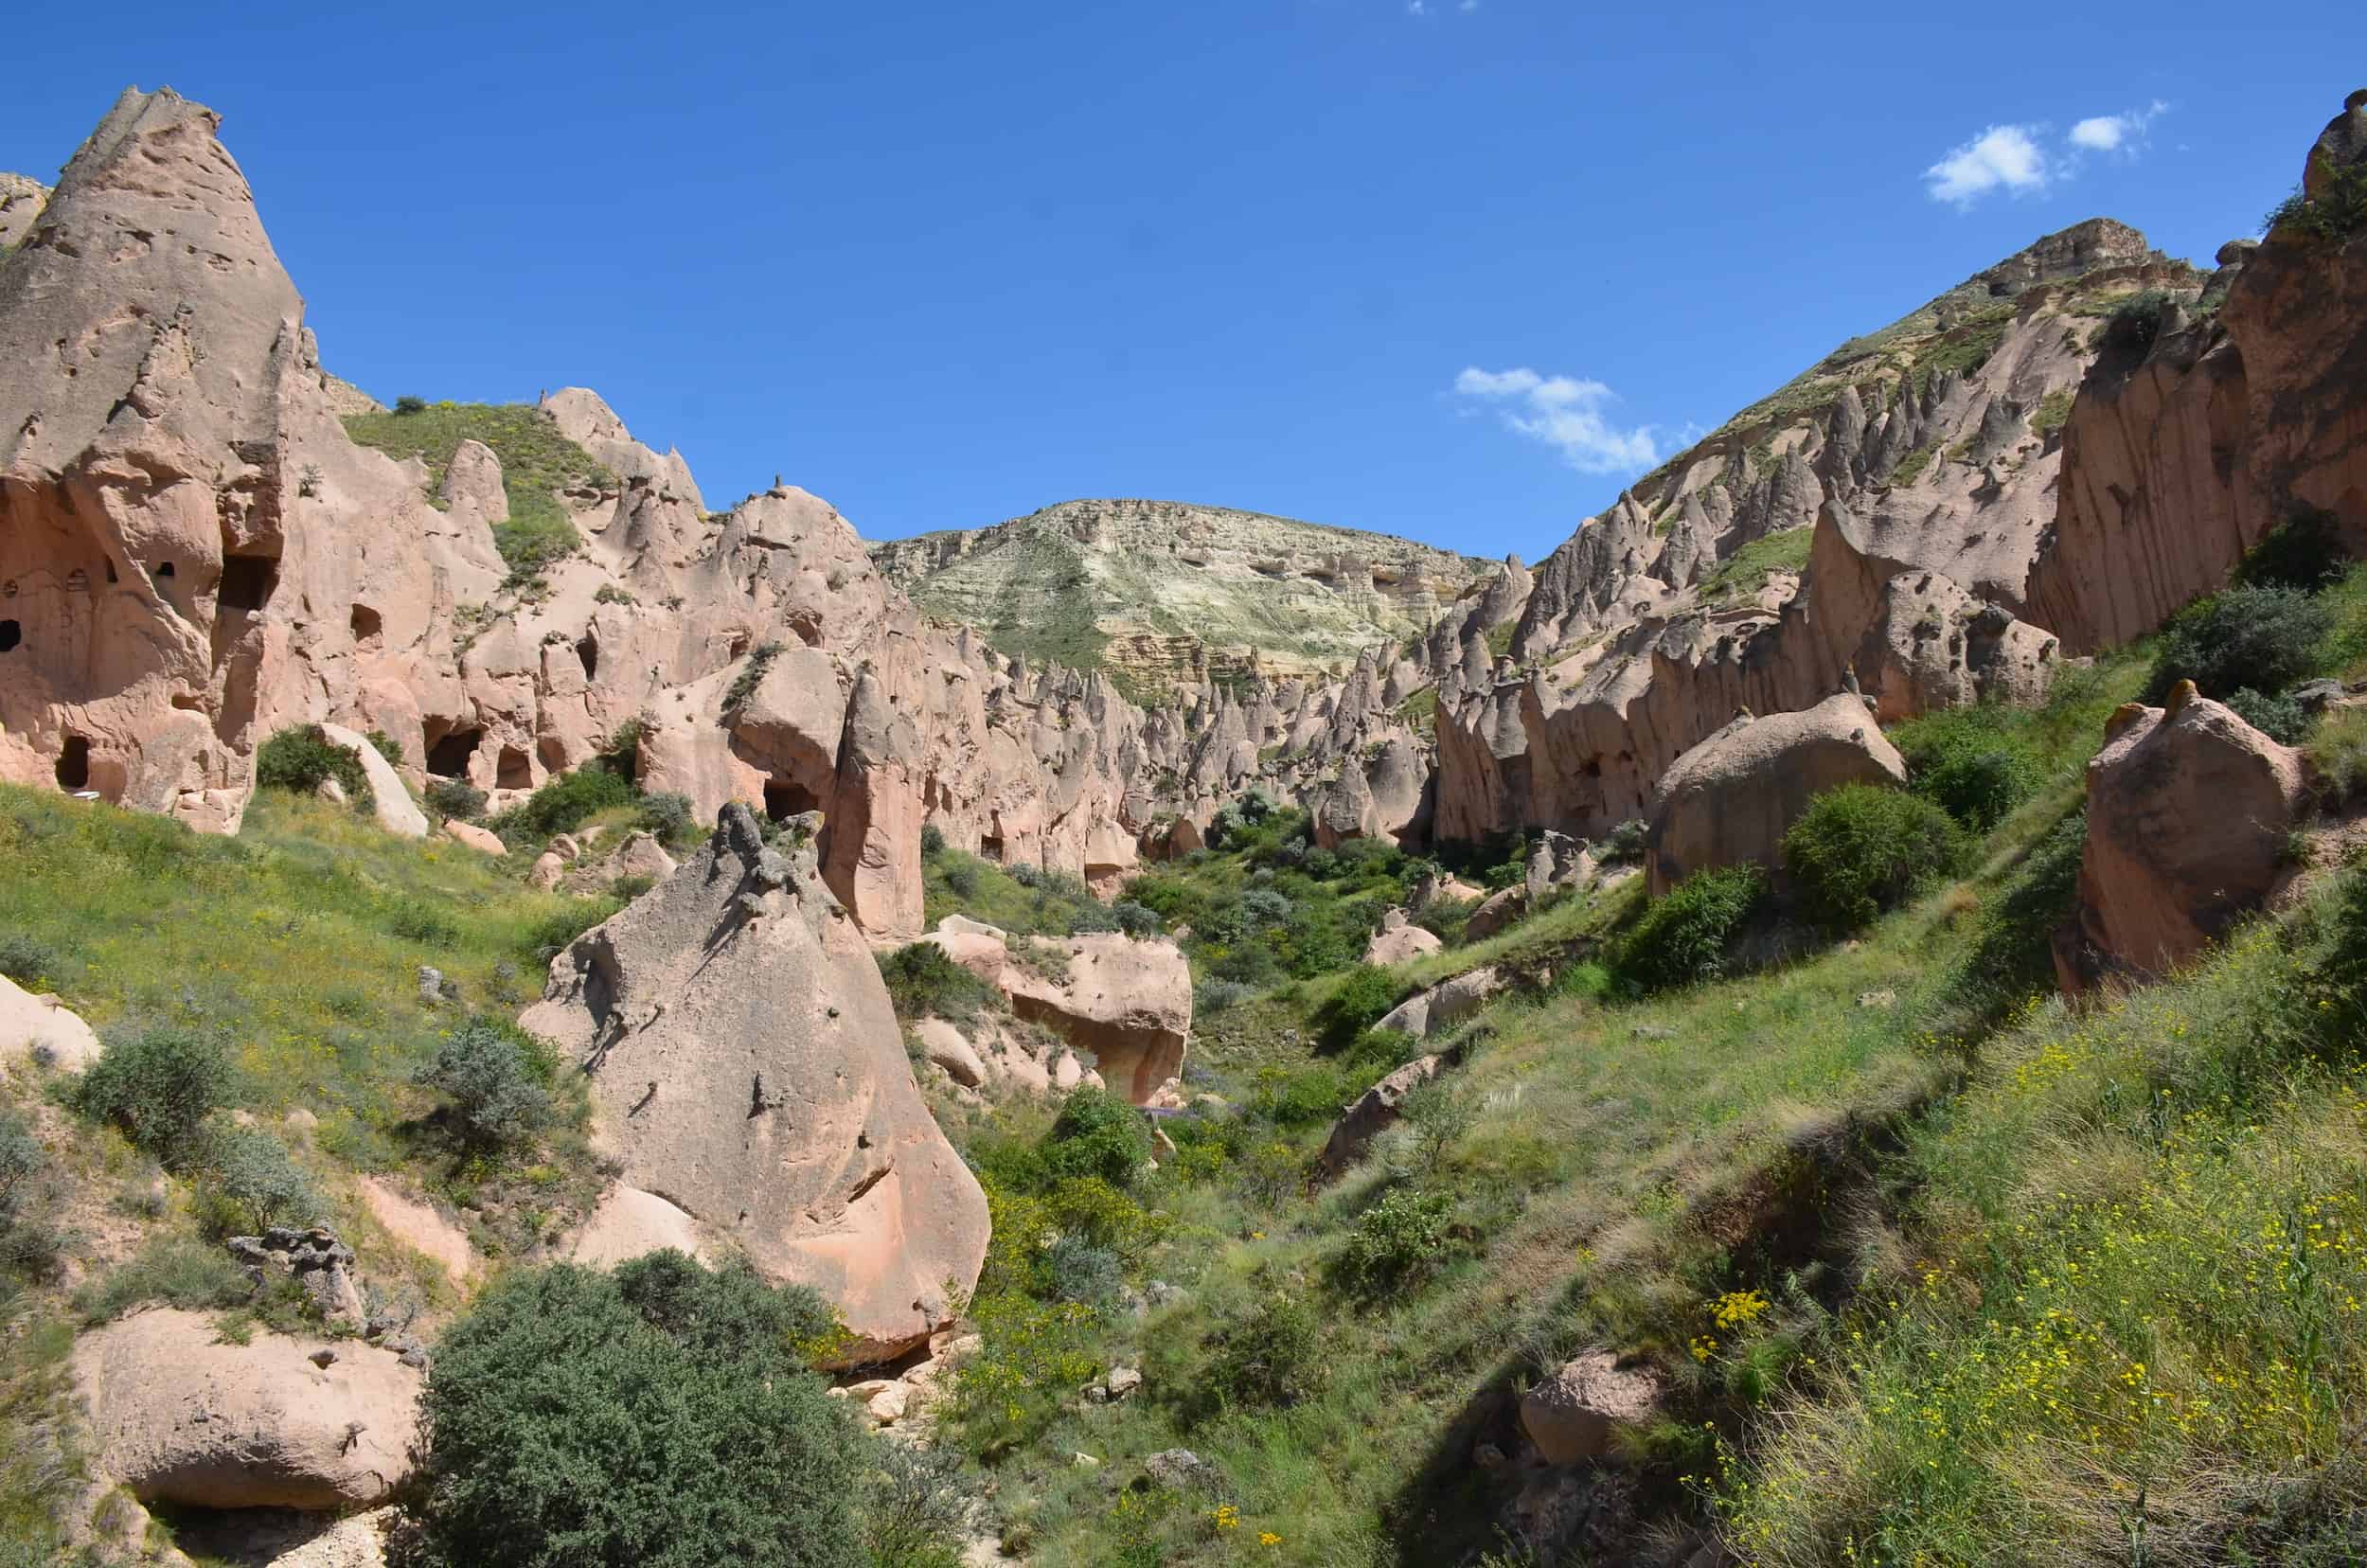 Looking towards the end of the second valley at Zelve Open Air Museum in Cappadocia, Turkey